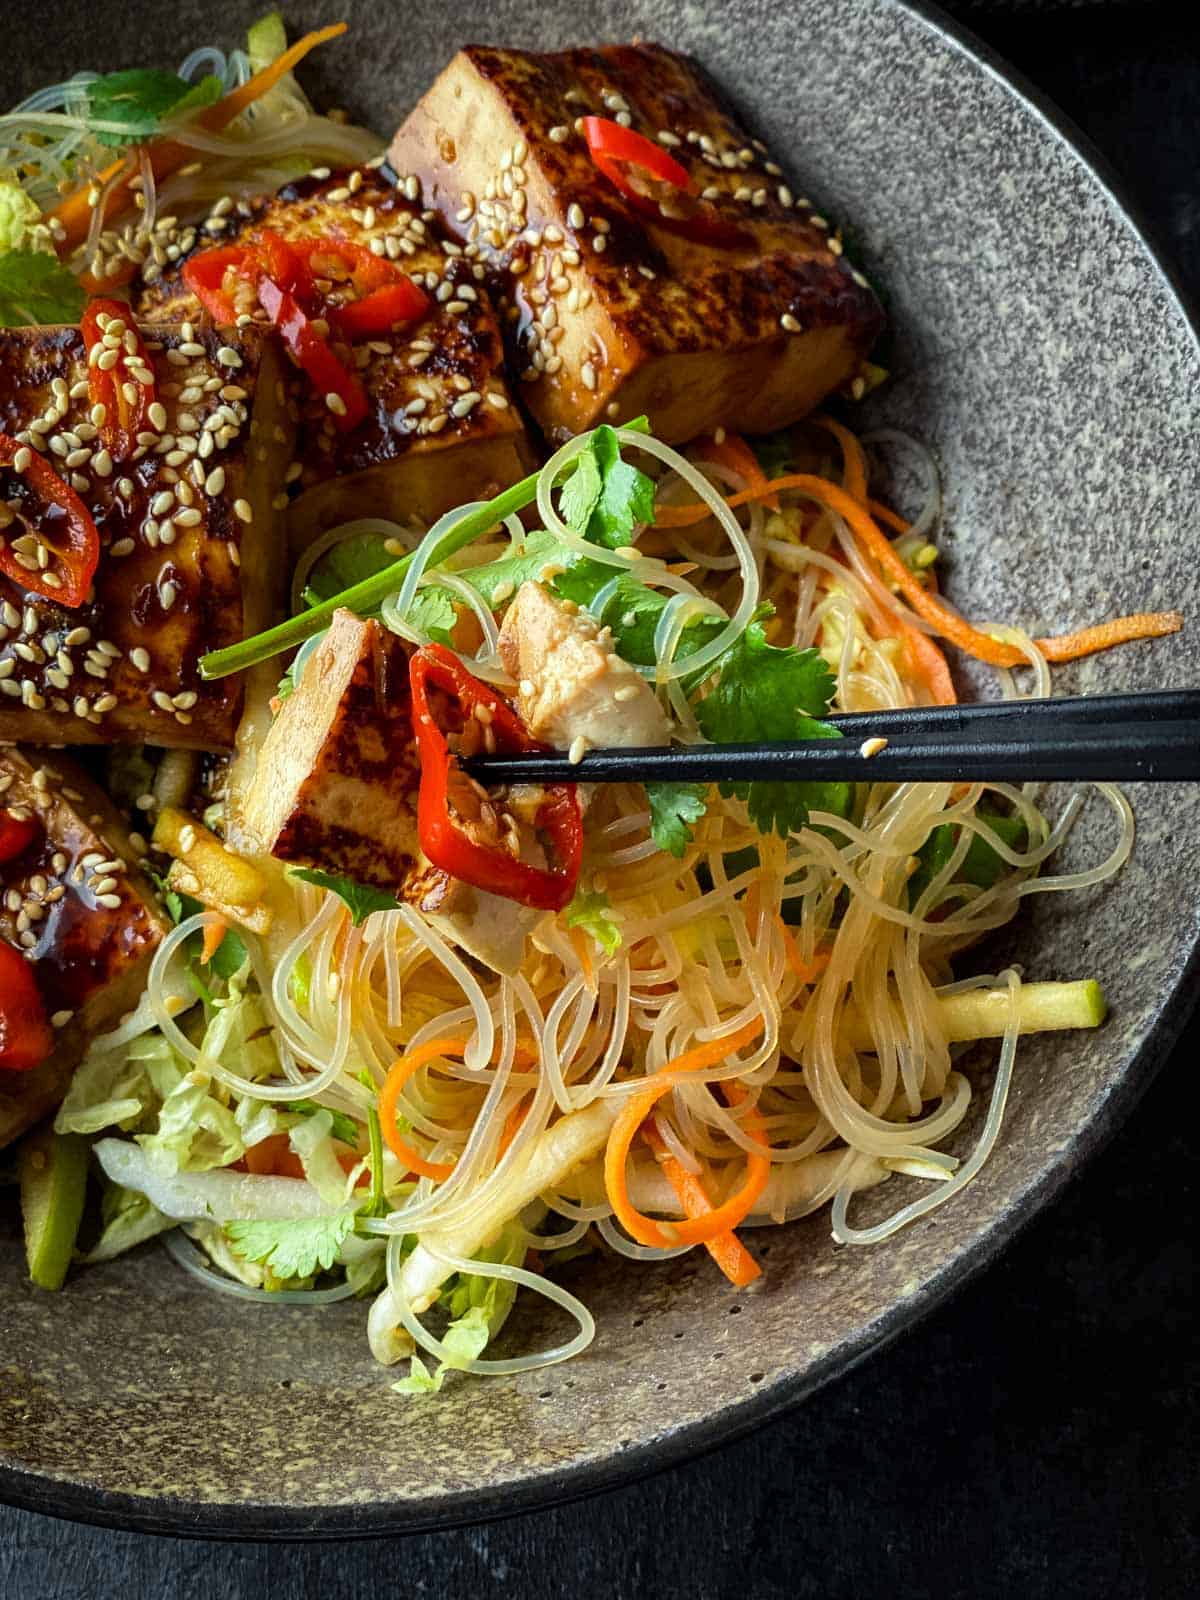 Using chopsticks to grab a serve of Glass Noodle Salad with Sticky Tofu from a bowl